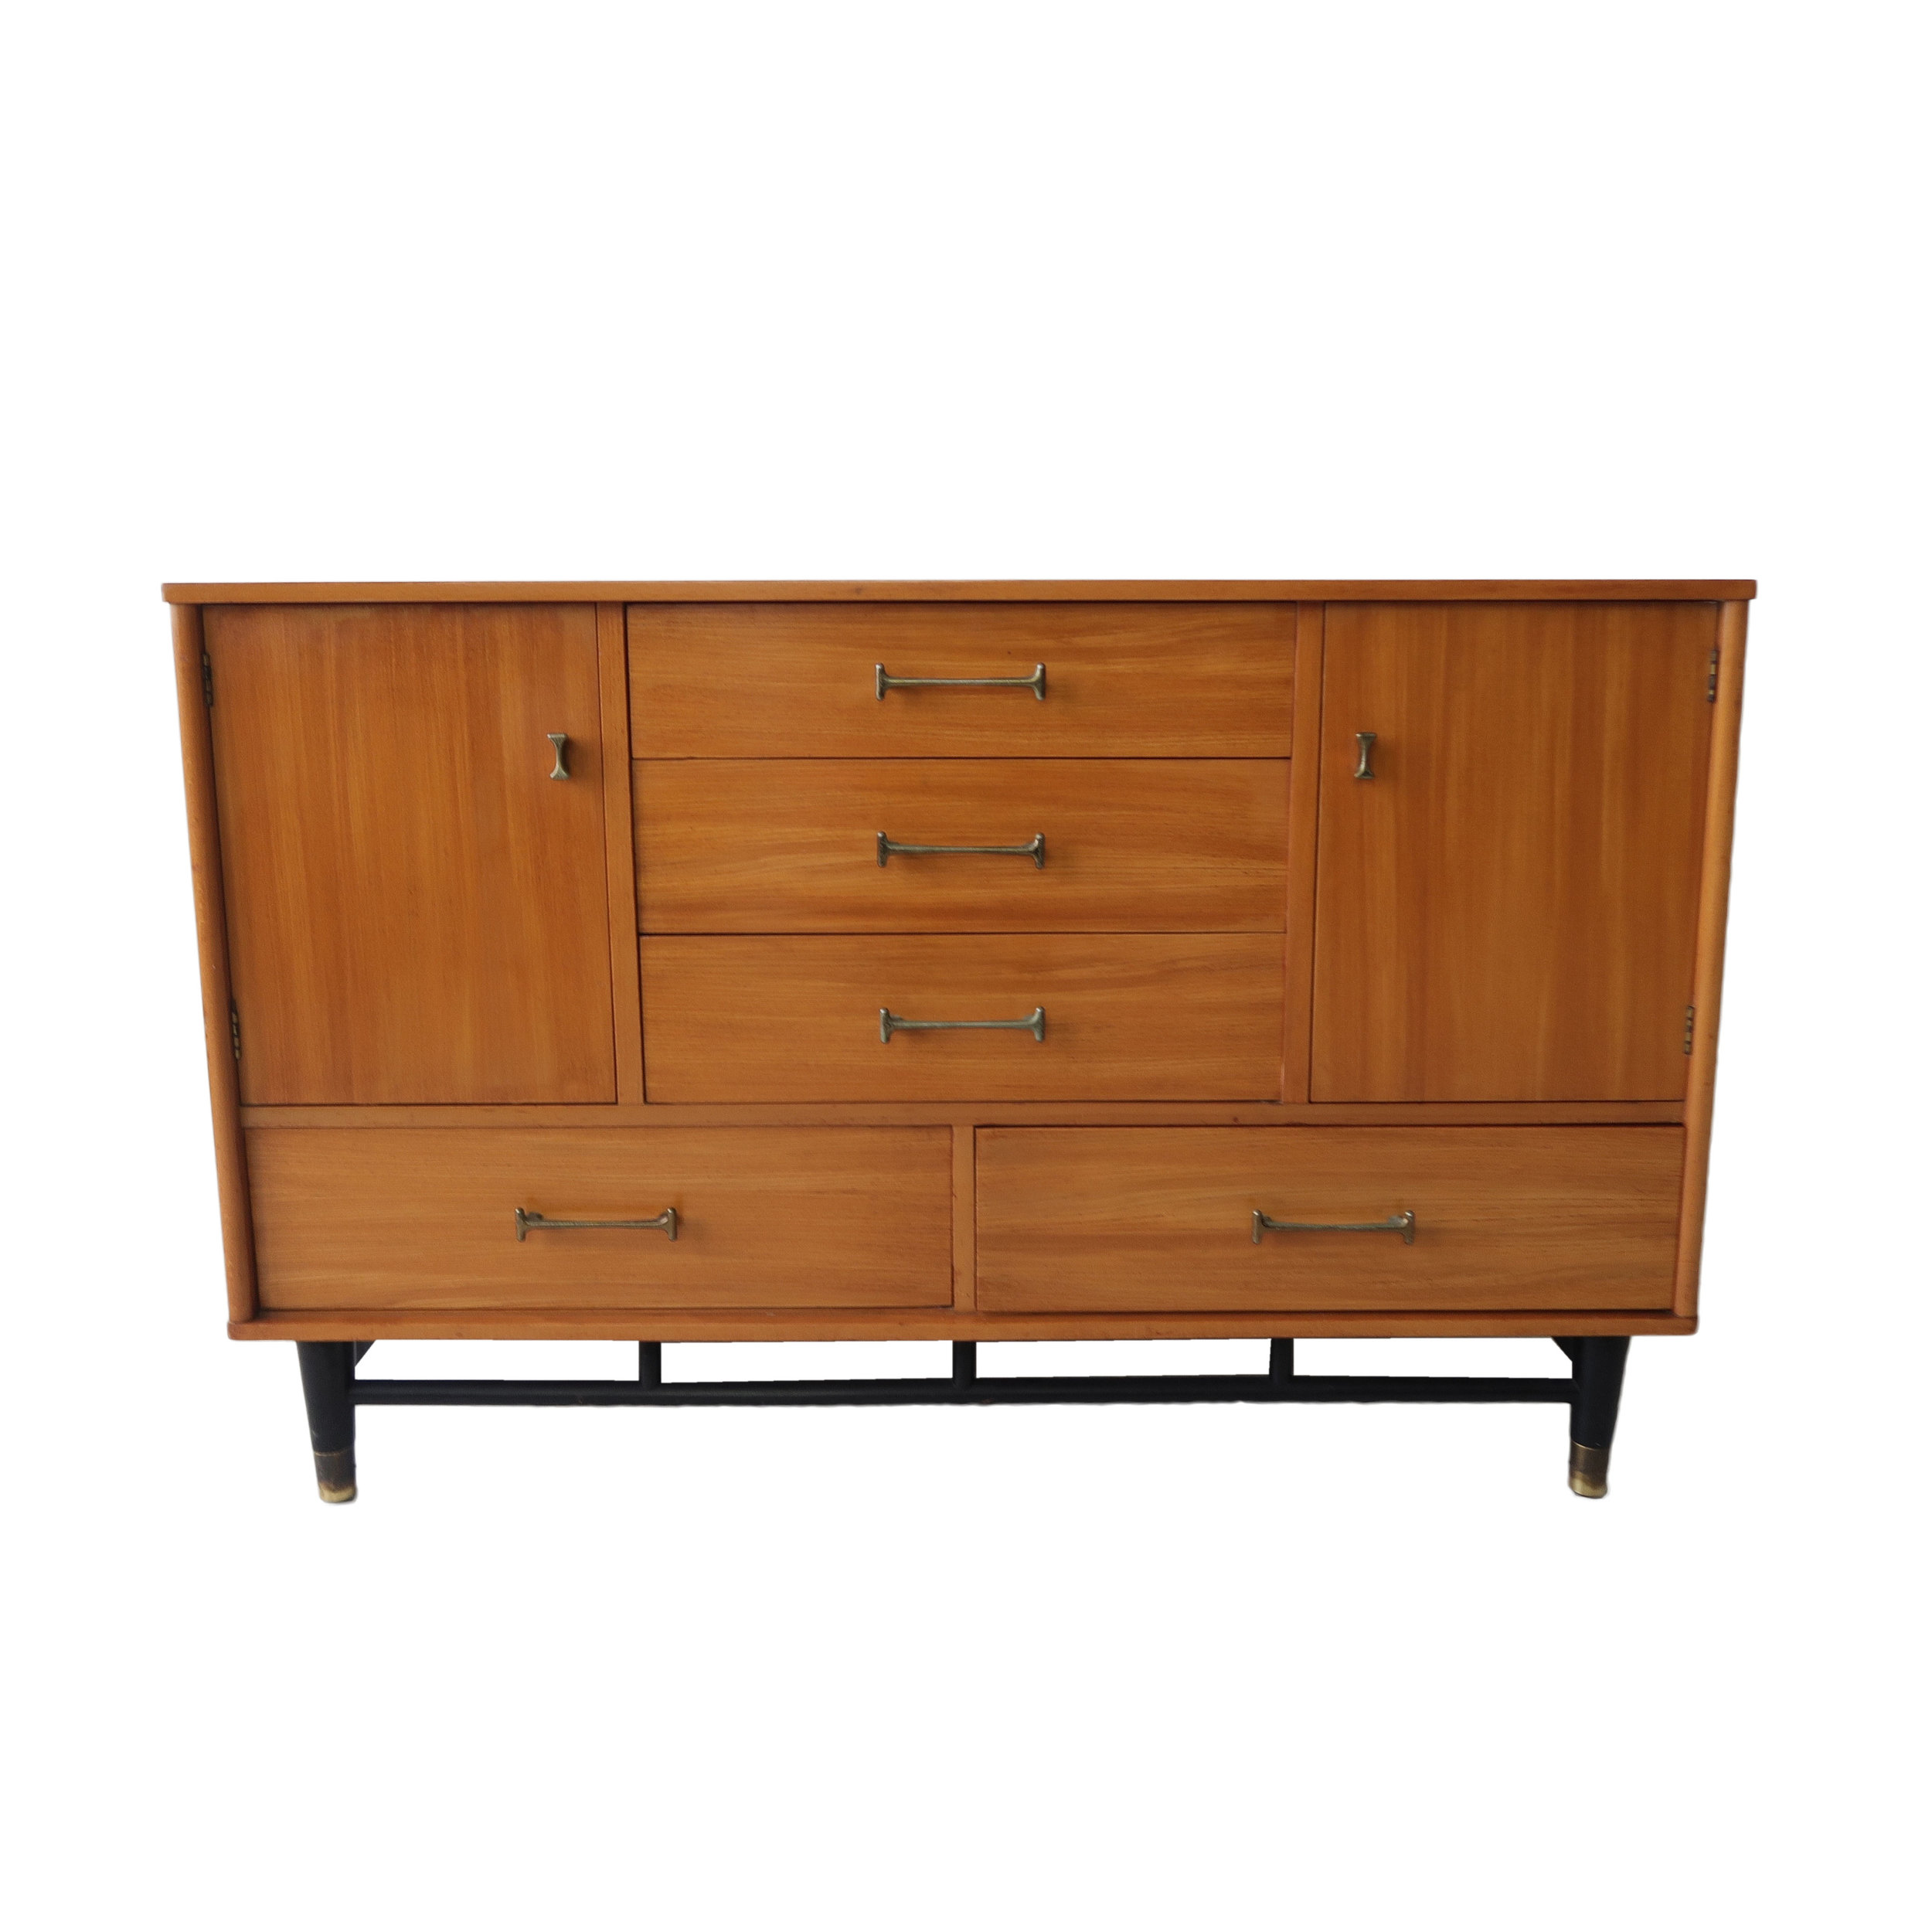 At 1st Sight Products Vintage Mid Century Modern Dresser By Drexel